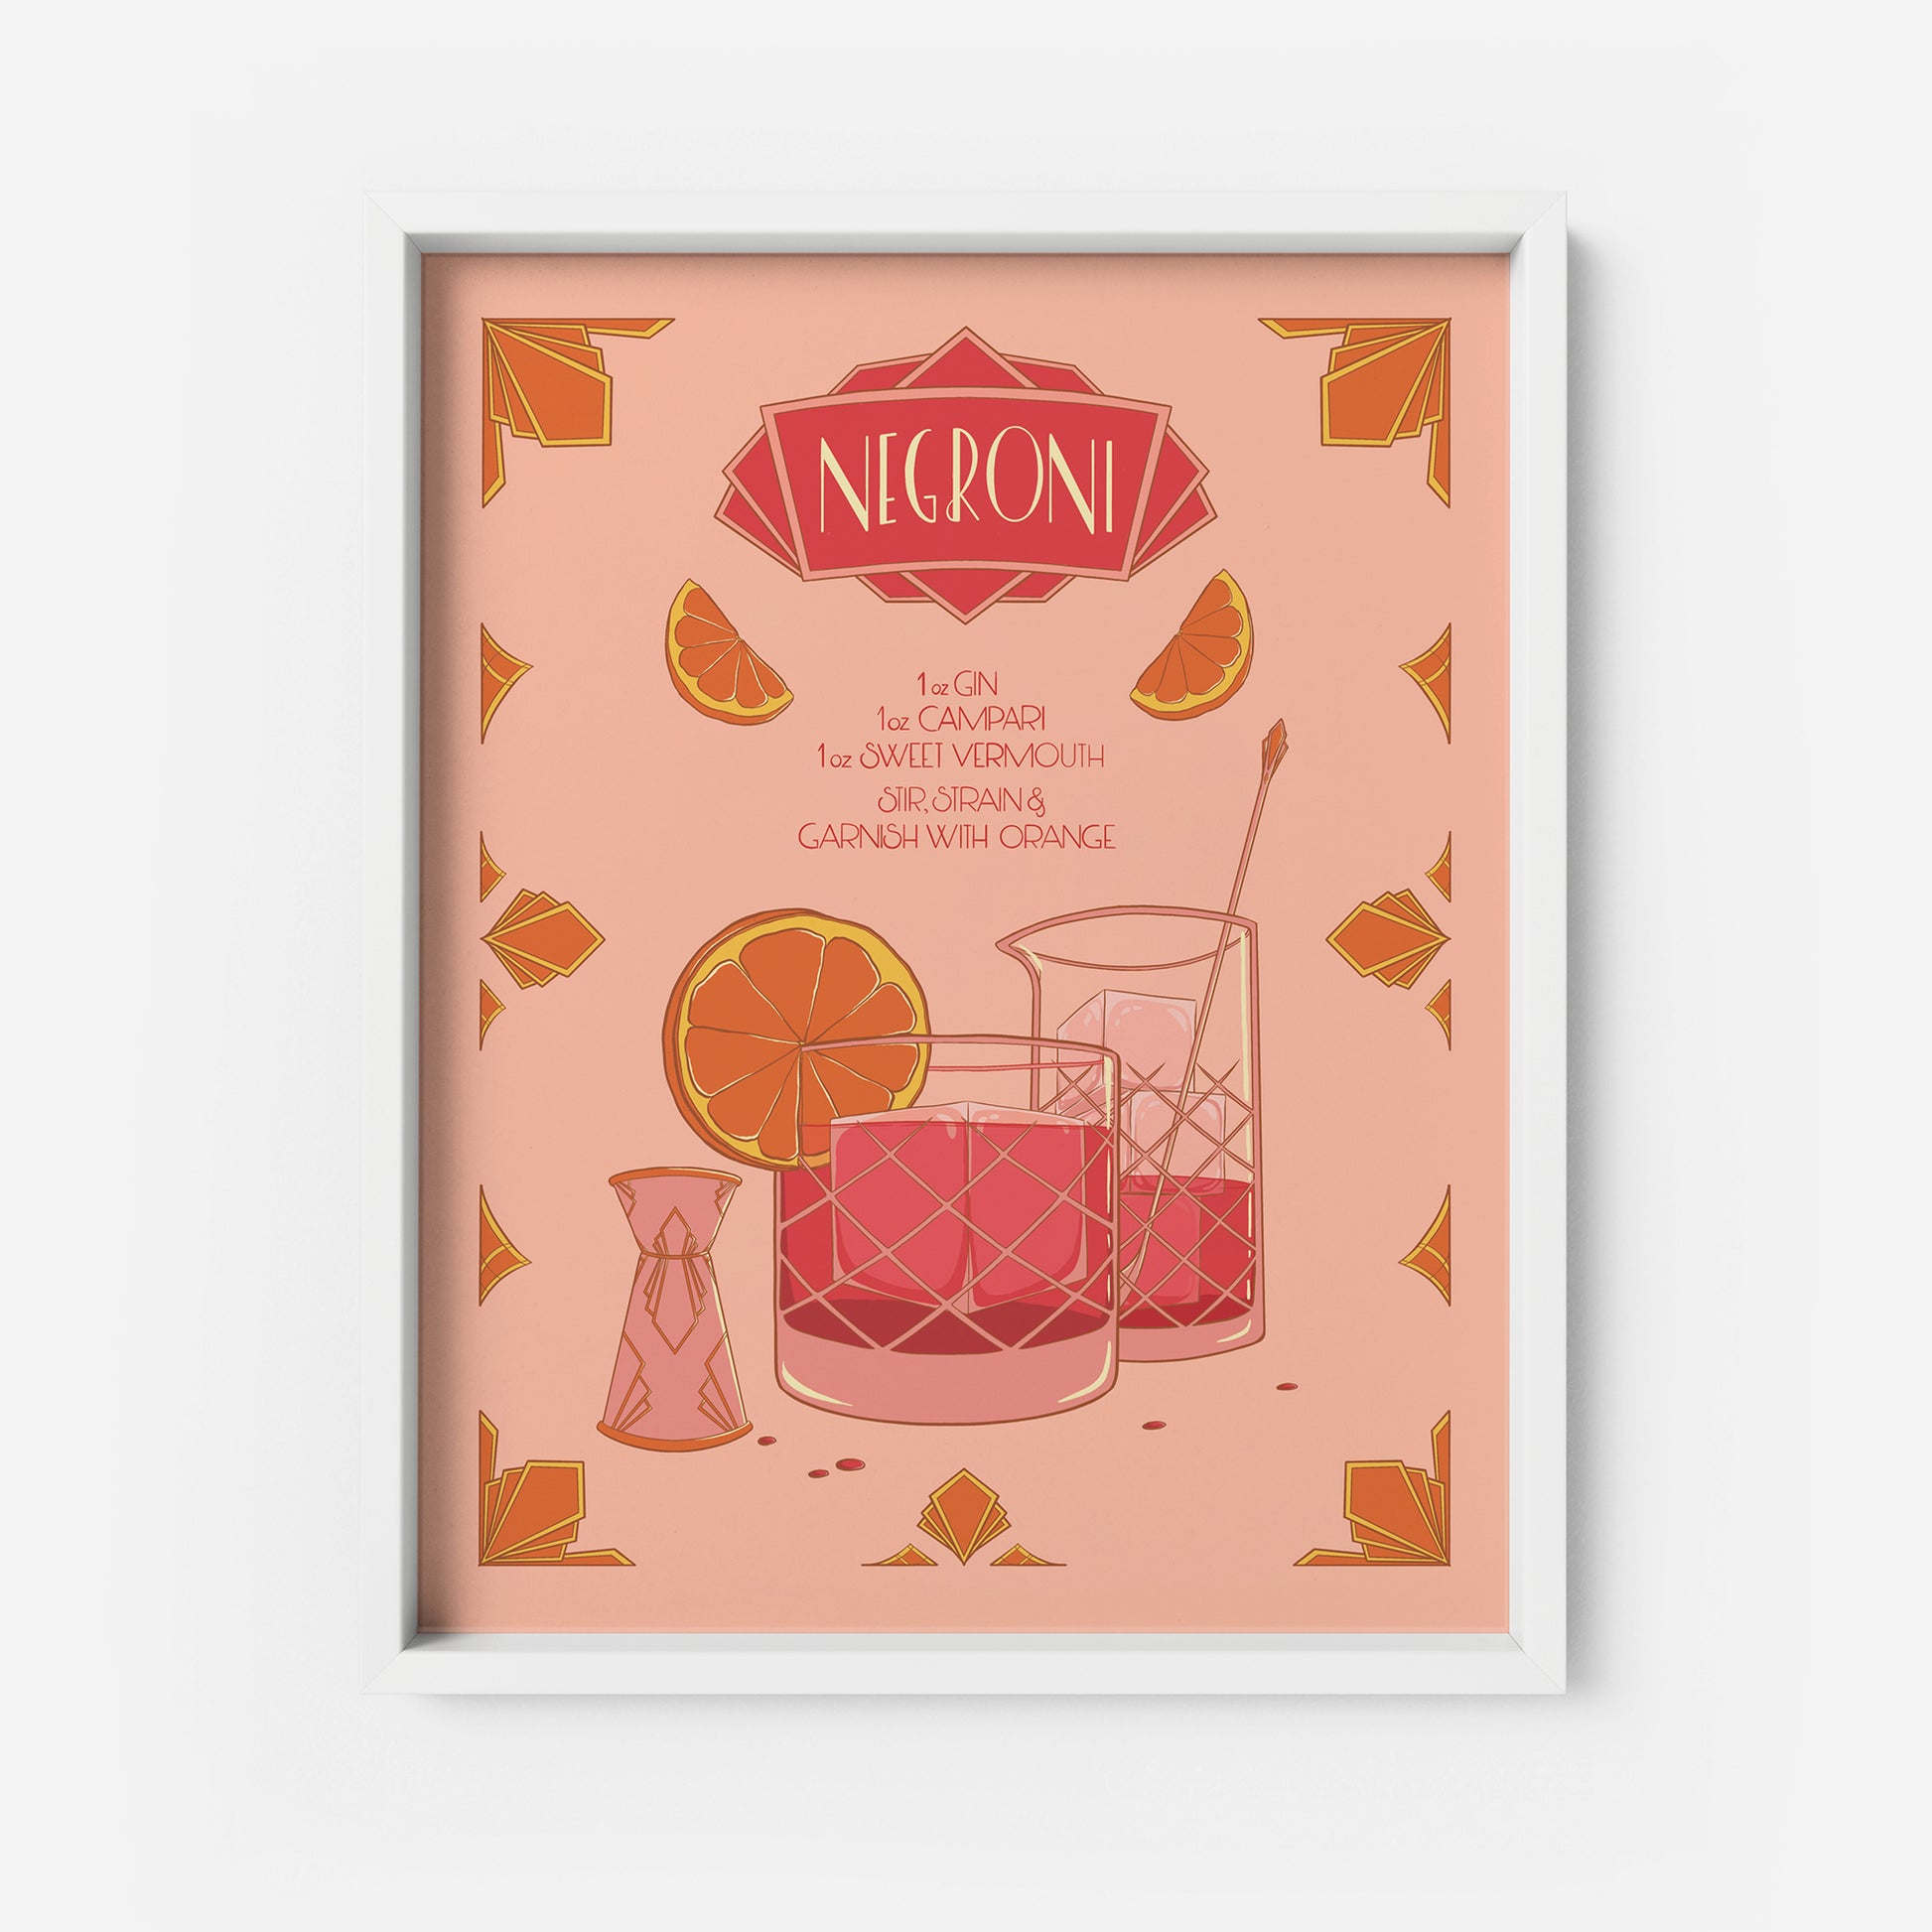 A pink and orange art-deco inspired, hand-lettered illustrated recipe of a Negroni features a glass of the drink itself, a mixing glass, a jigger, and art deco flourishes. The artwork appears in a white frame.